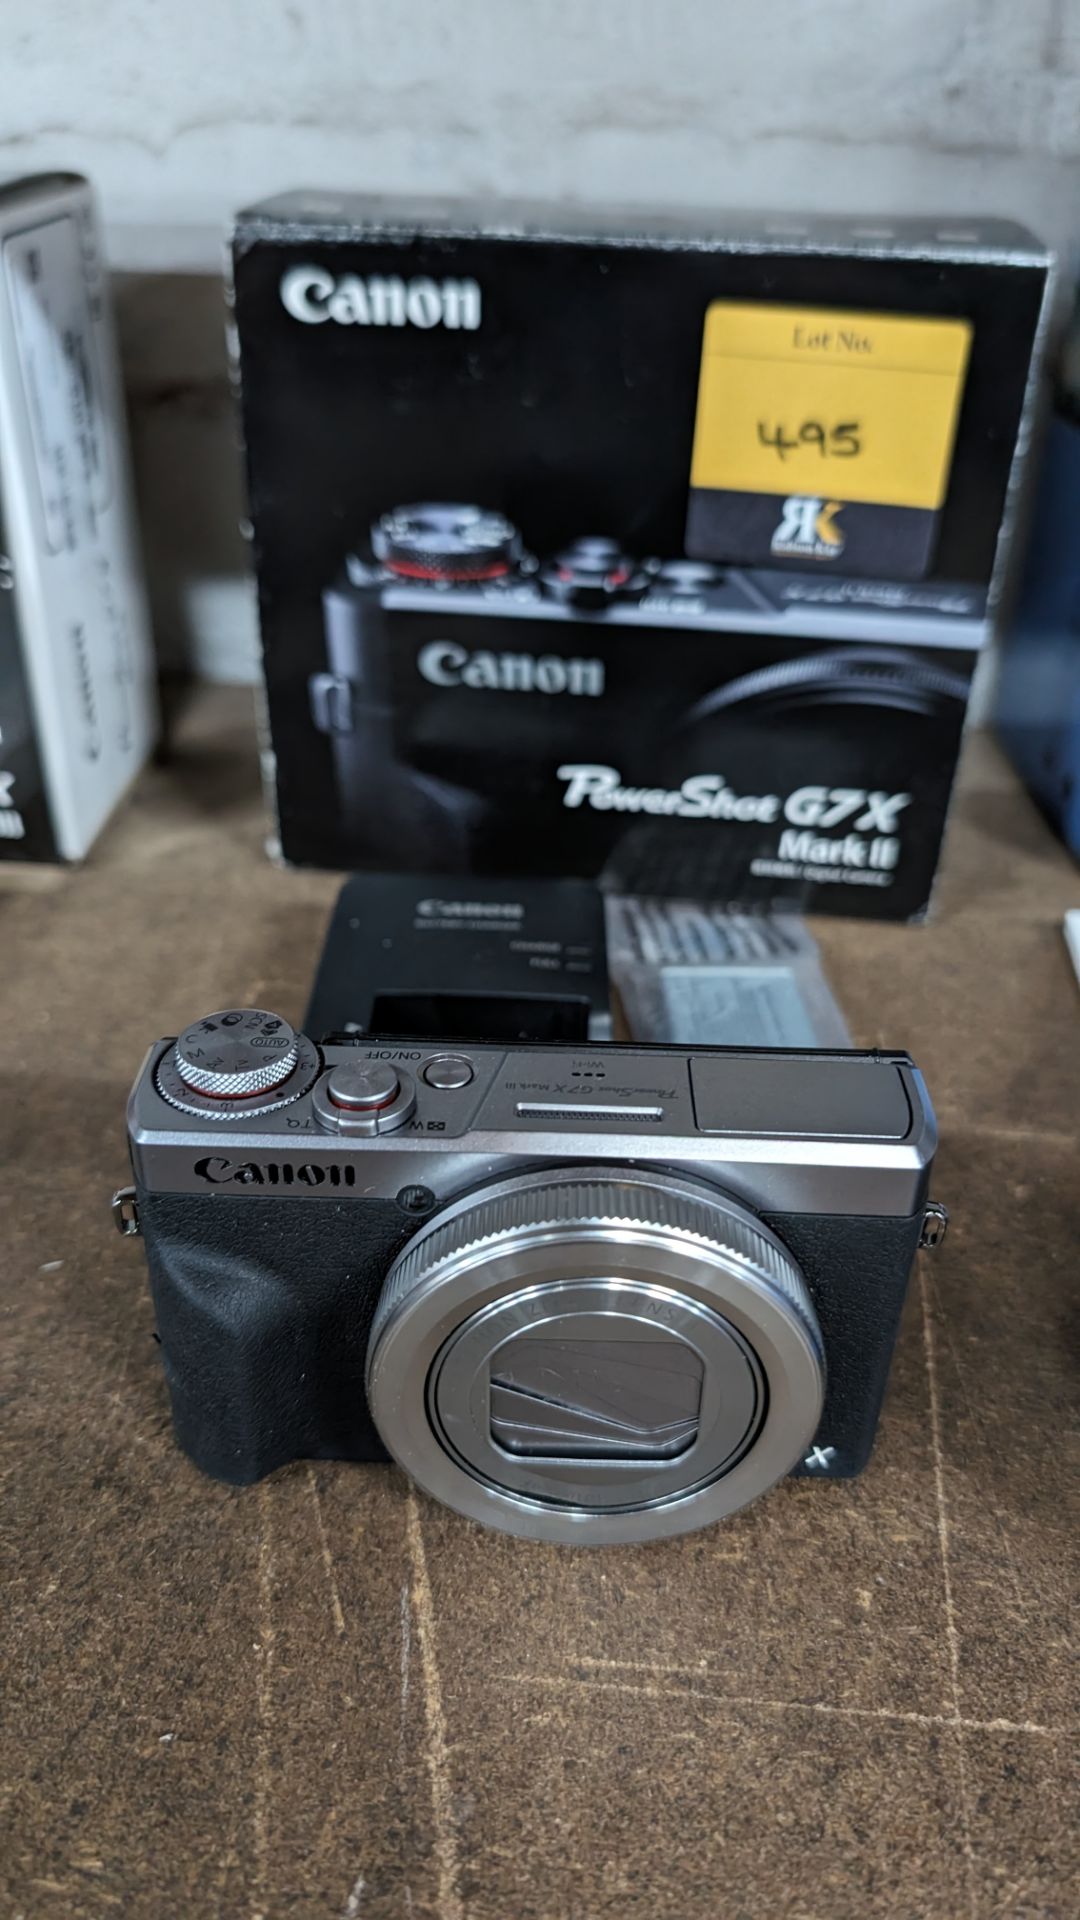 Canon PowerShot G7X Mark II camera, including battery and charger